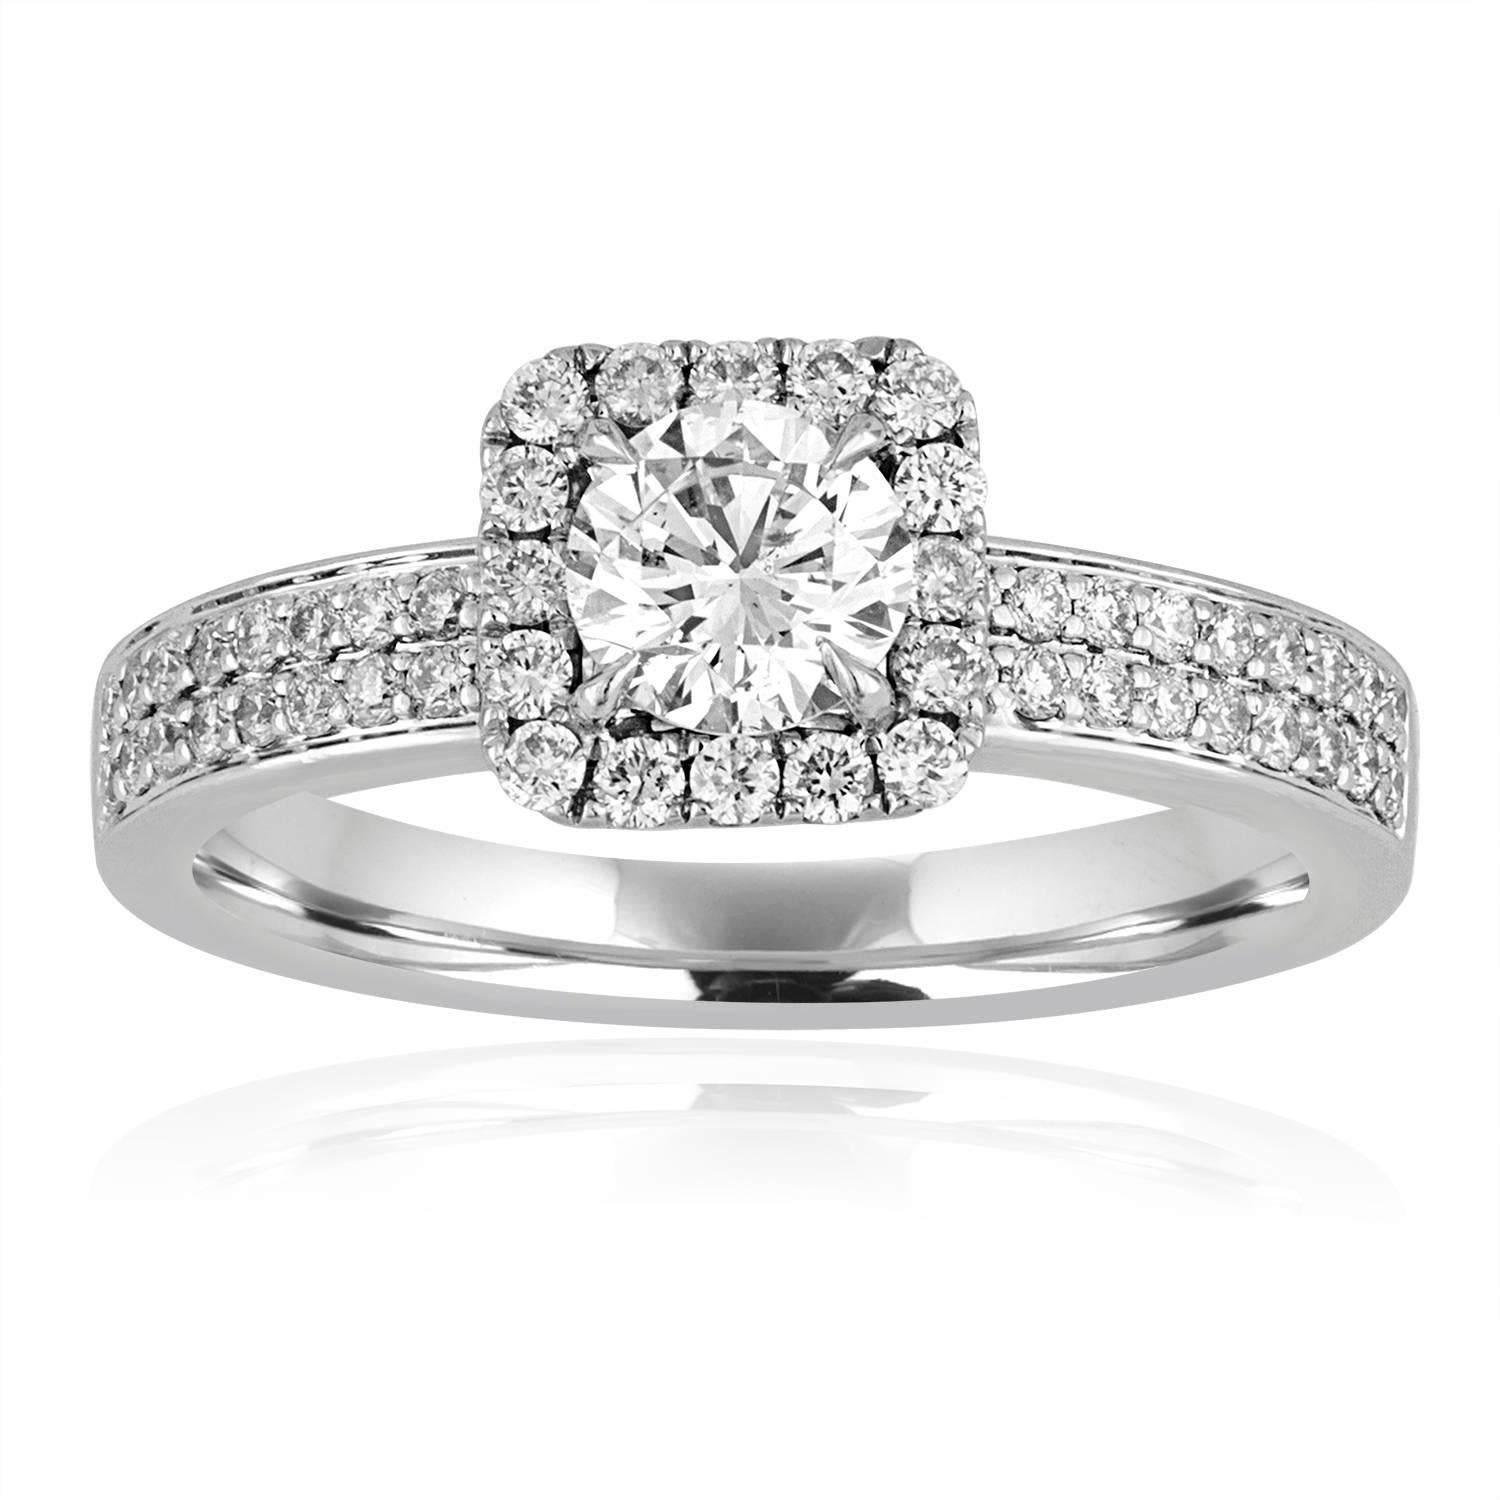 Beautiful Diamond Wedding Set
The Set is 18K White Gold
The Engagement Ring Center Stone is GIA Certified 0.55Ct H I1
The setting has 0.42Ct in Diamonds F/G VS/SI 
The Engagement Ring is a size 6.25, sizable
The Engagement RIng weighs 5.1